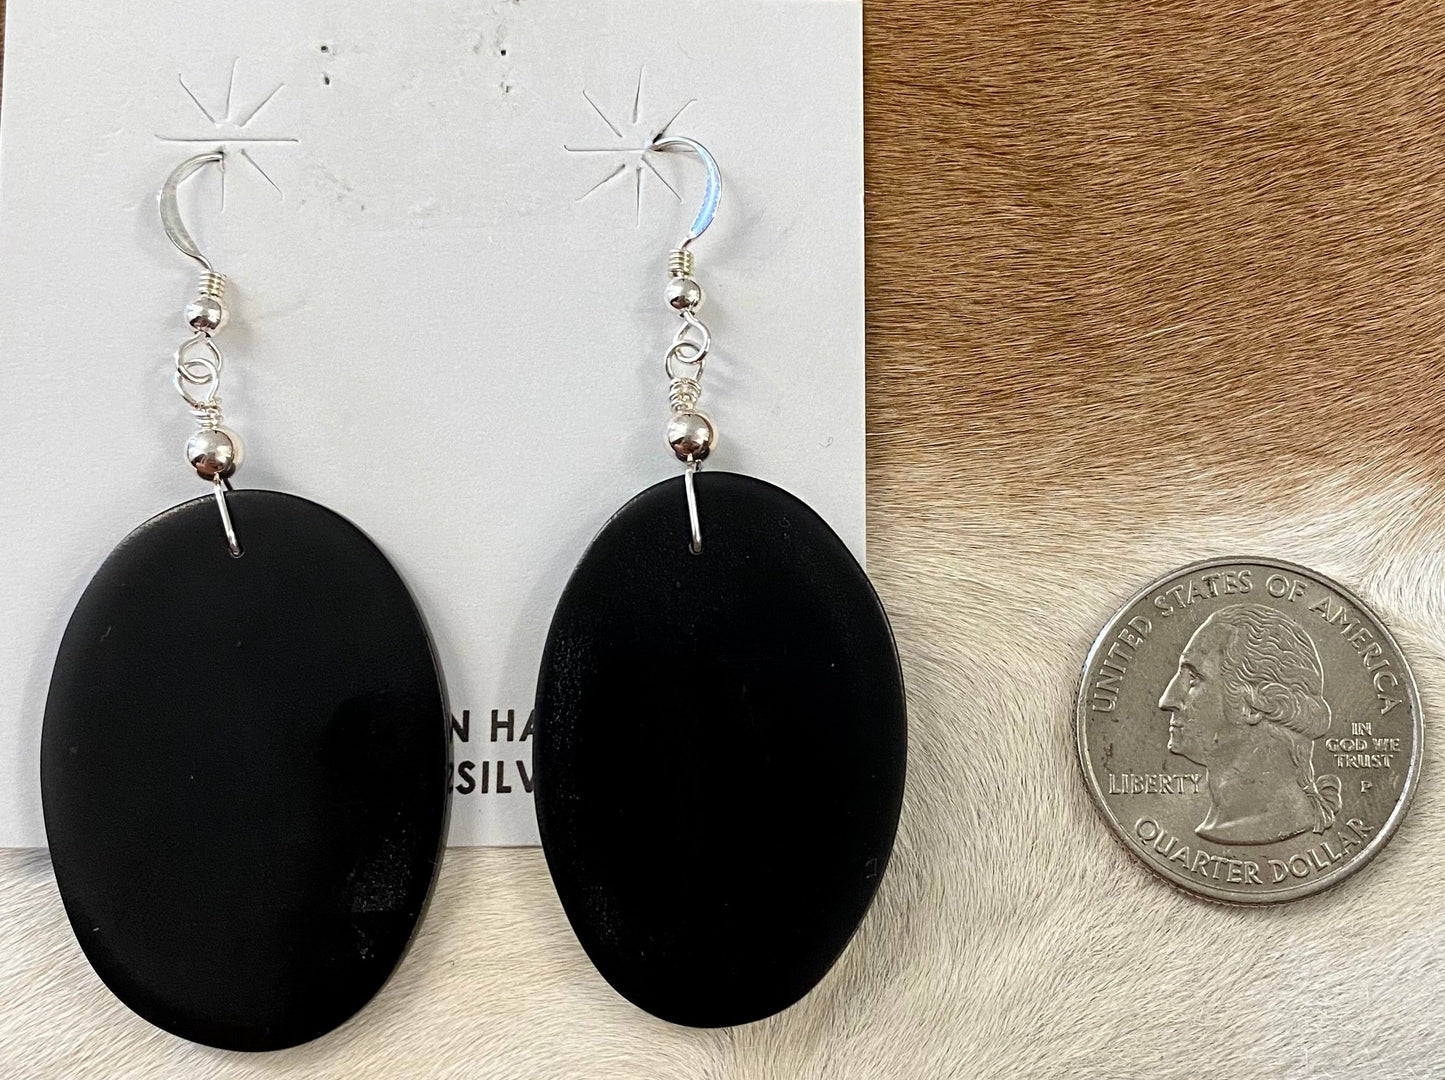 Jet black slab style hook authentic handmade sterling silver earrings. These earrings are gorgeous and simple.   What is the stone Jet?  Jet is a velvety black-colored gemstone that is a type of lignite. Jet is derived from decaying wood that undergoes extreme pressure and heat. The wood then becomes fossilized as a compact black material.The Alluring Jet Gemstone Earrings | Native Made Earrings 